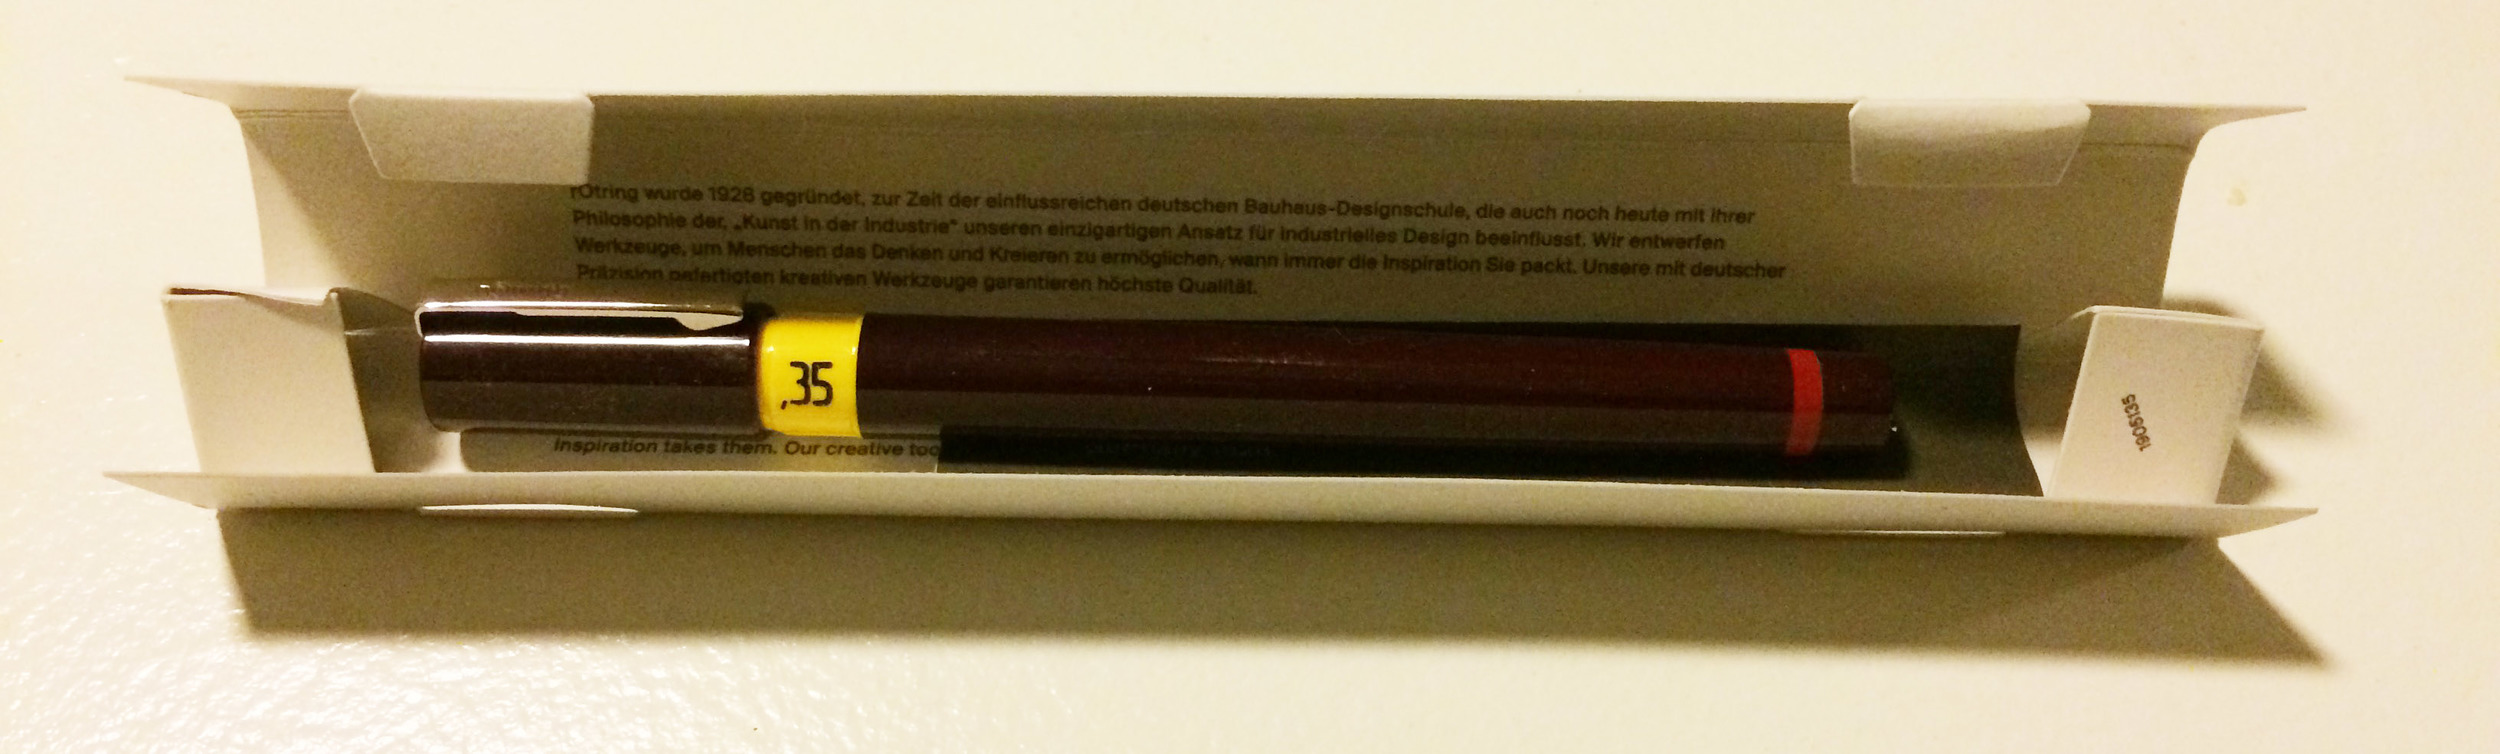 Rotring Rapidograph 0.35 mm Review — The Pen Addict